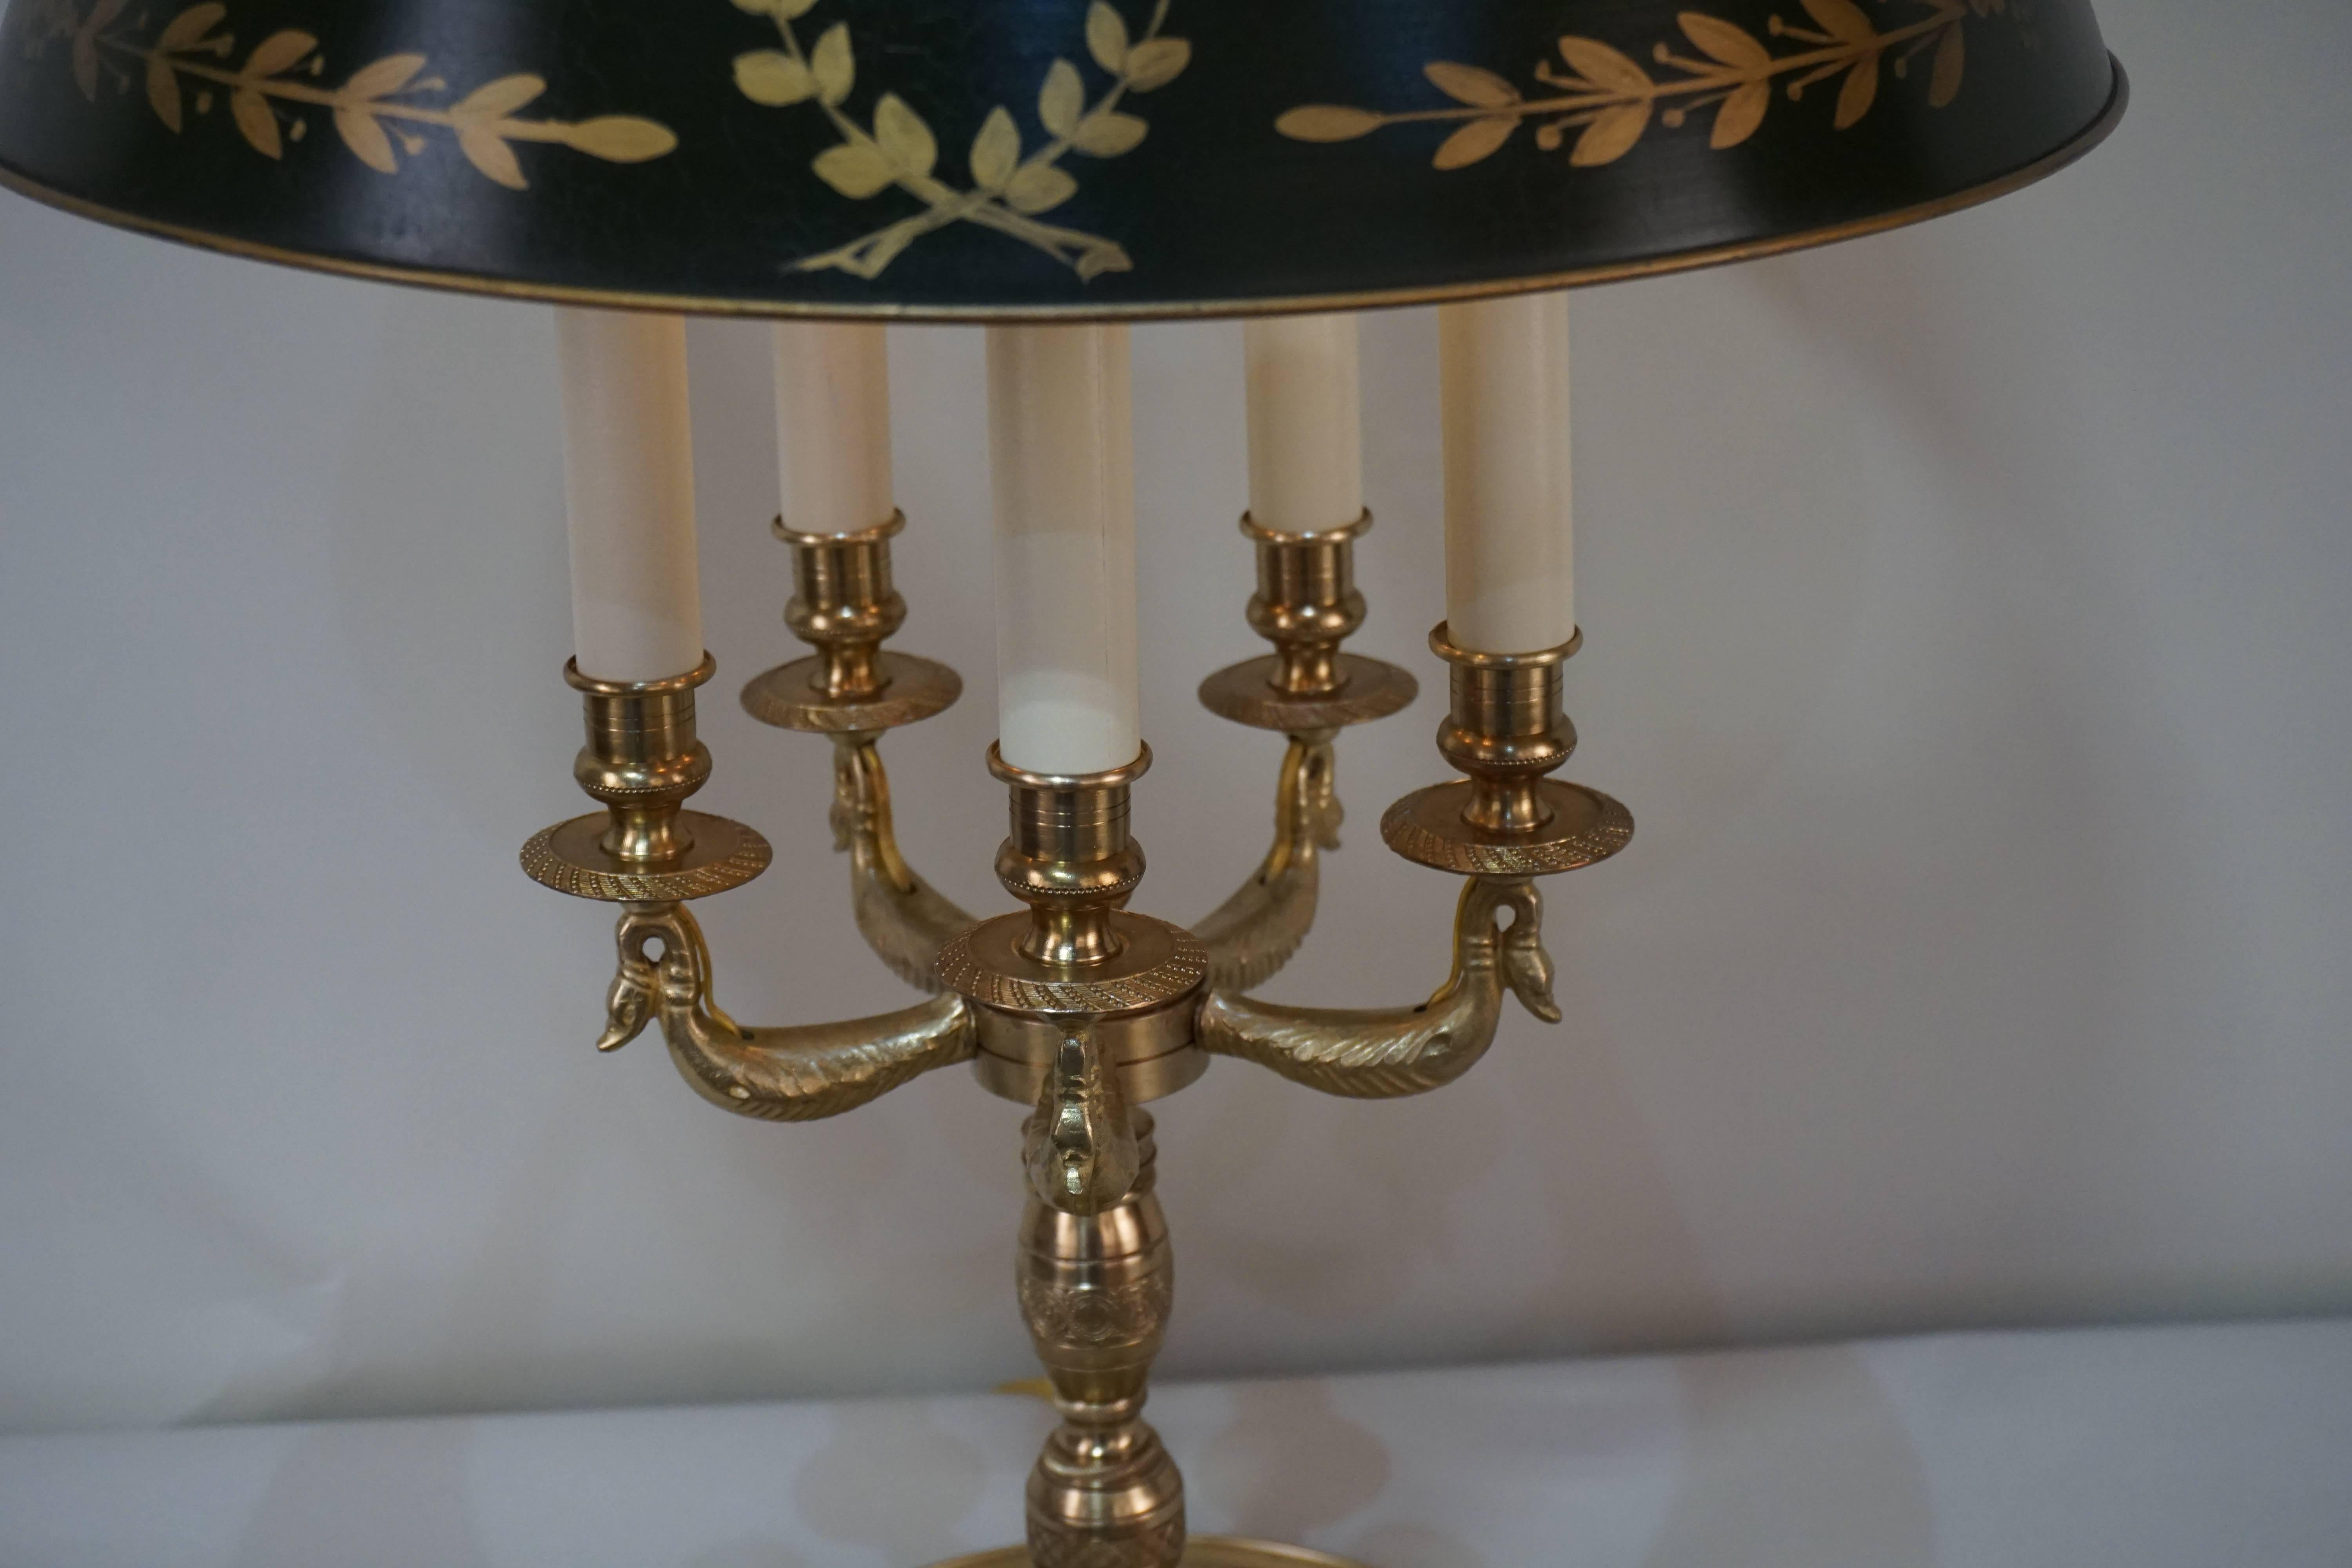 An empire style five light French bouillotte table lamp with adjustable height shade. 
Shade is dark green/amber color.